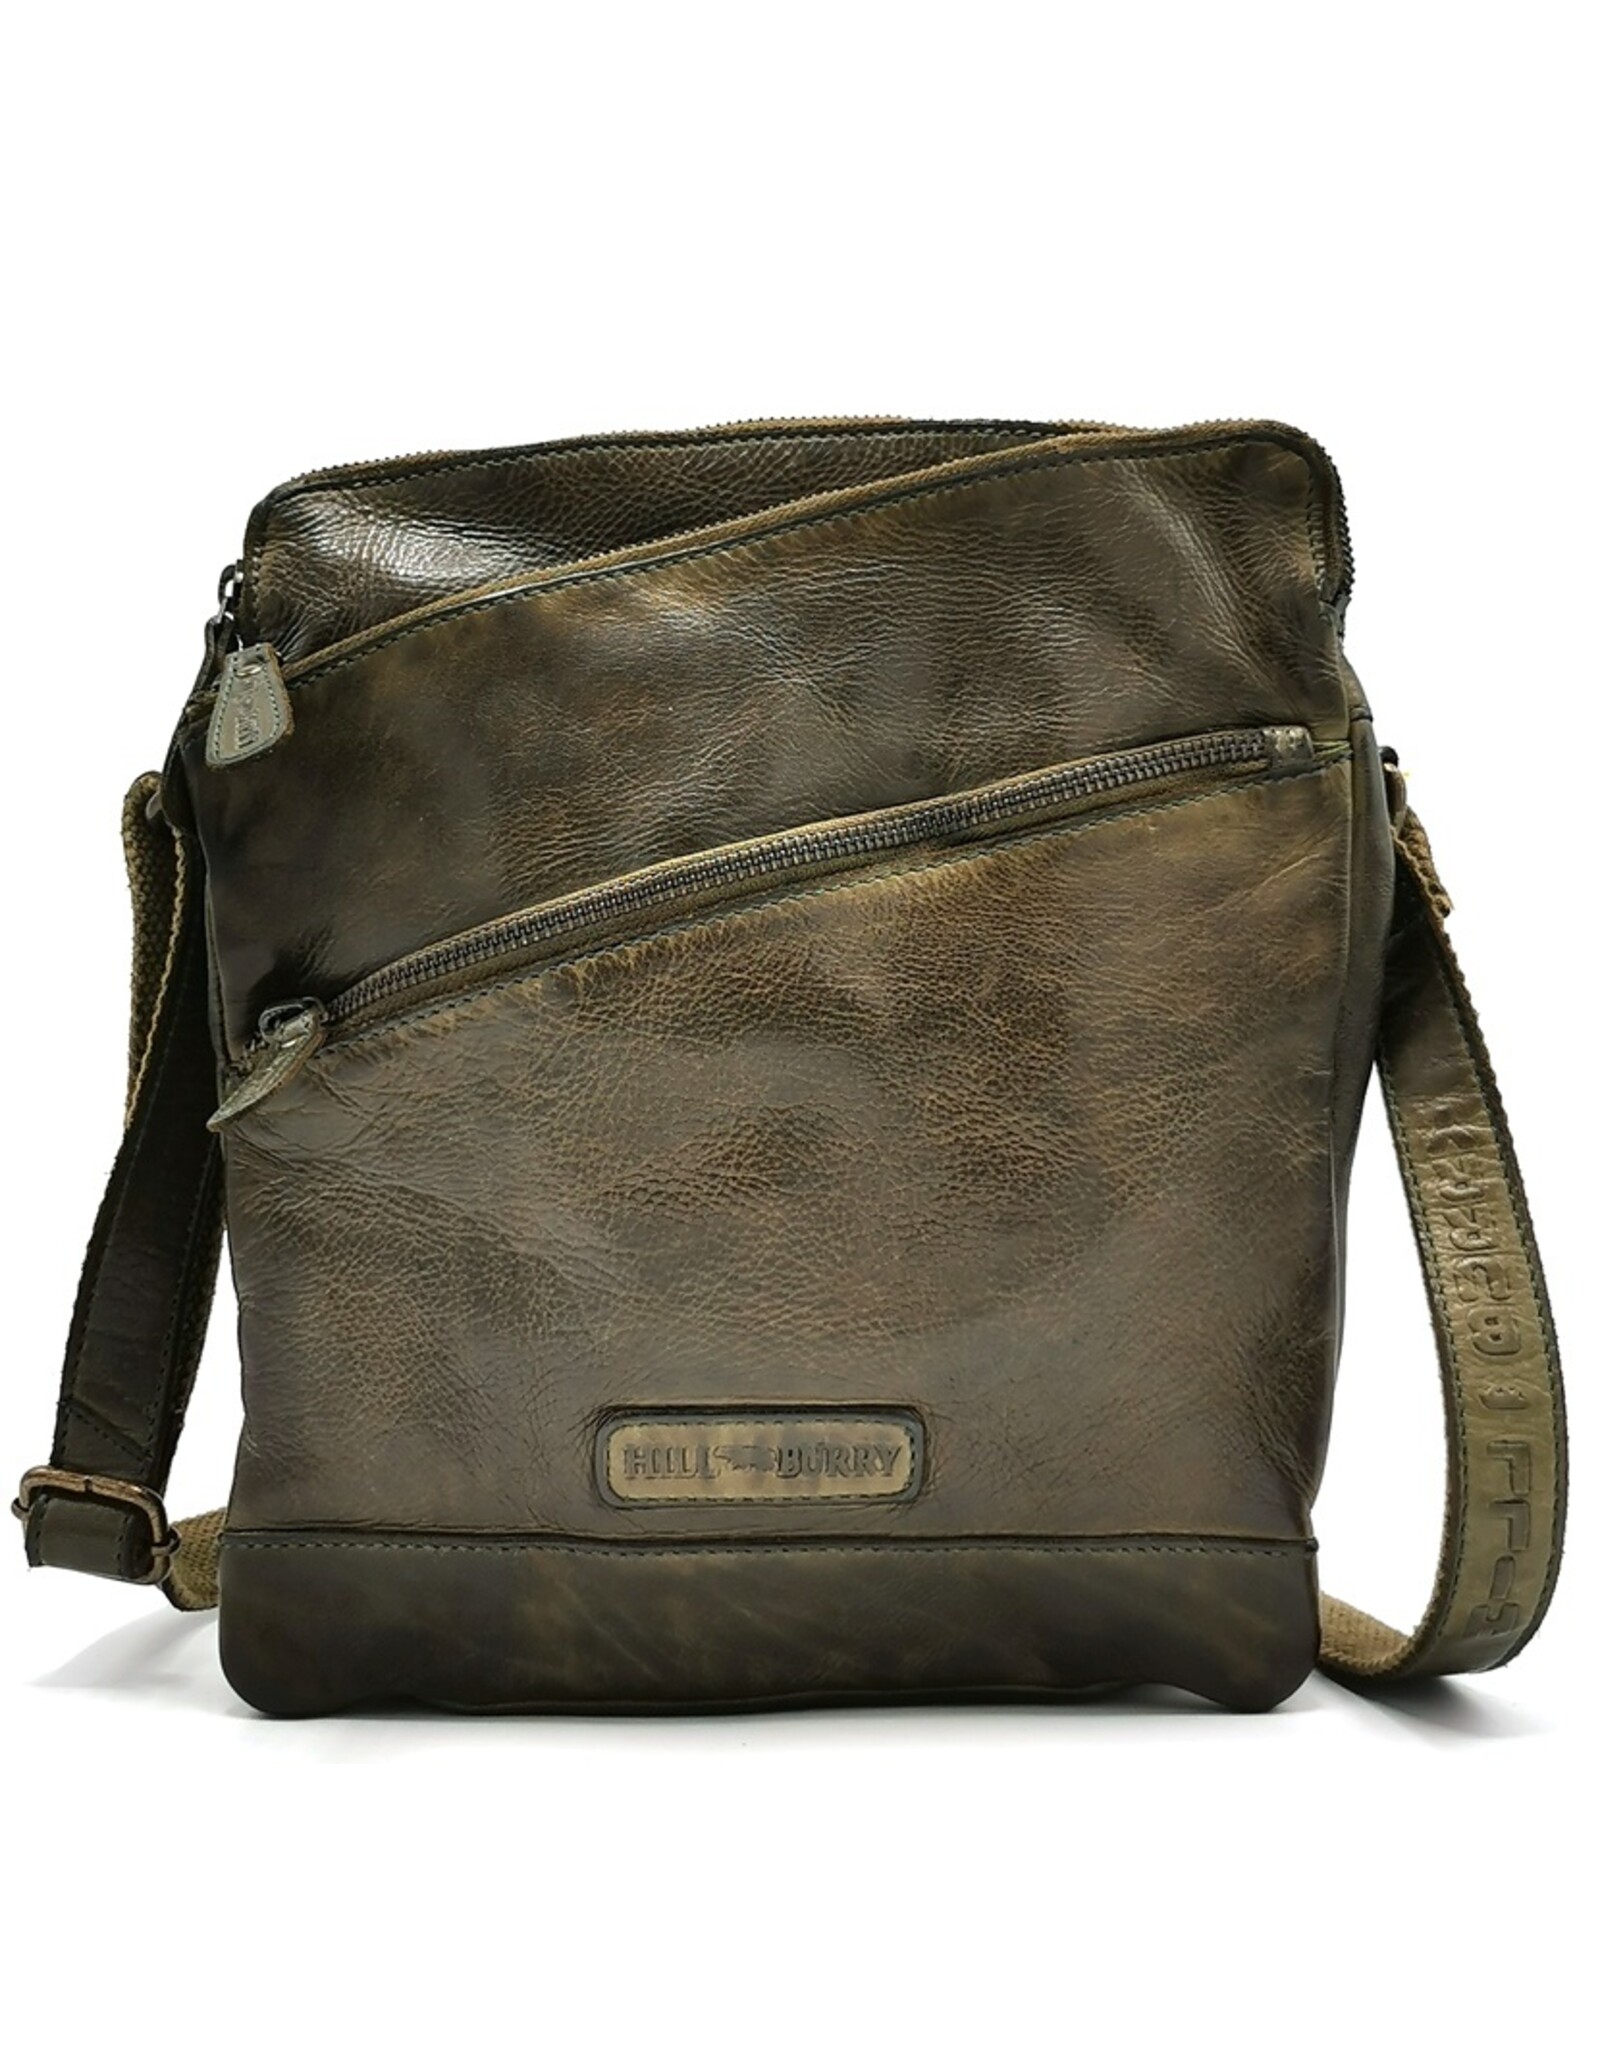 HillBurry Leather Shoulder bags  Leather crossbody bags - HillBurry Smart Crossbody Bag Washed Leather green